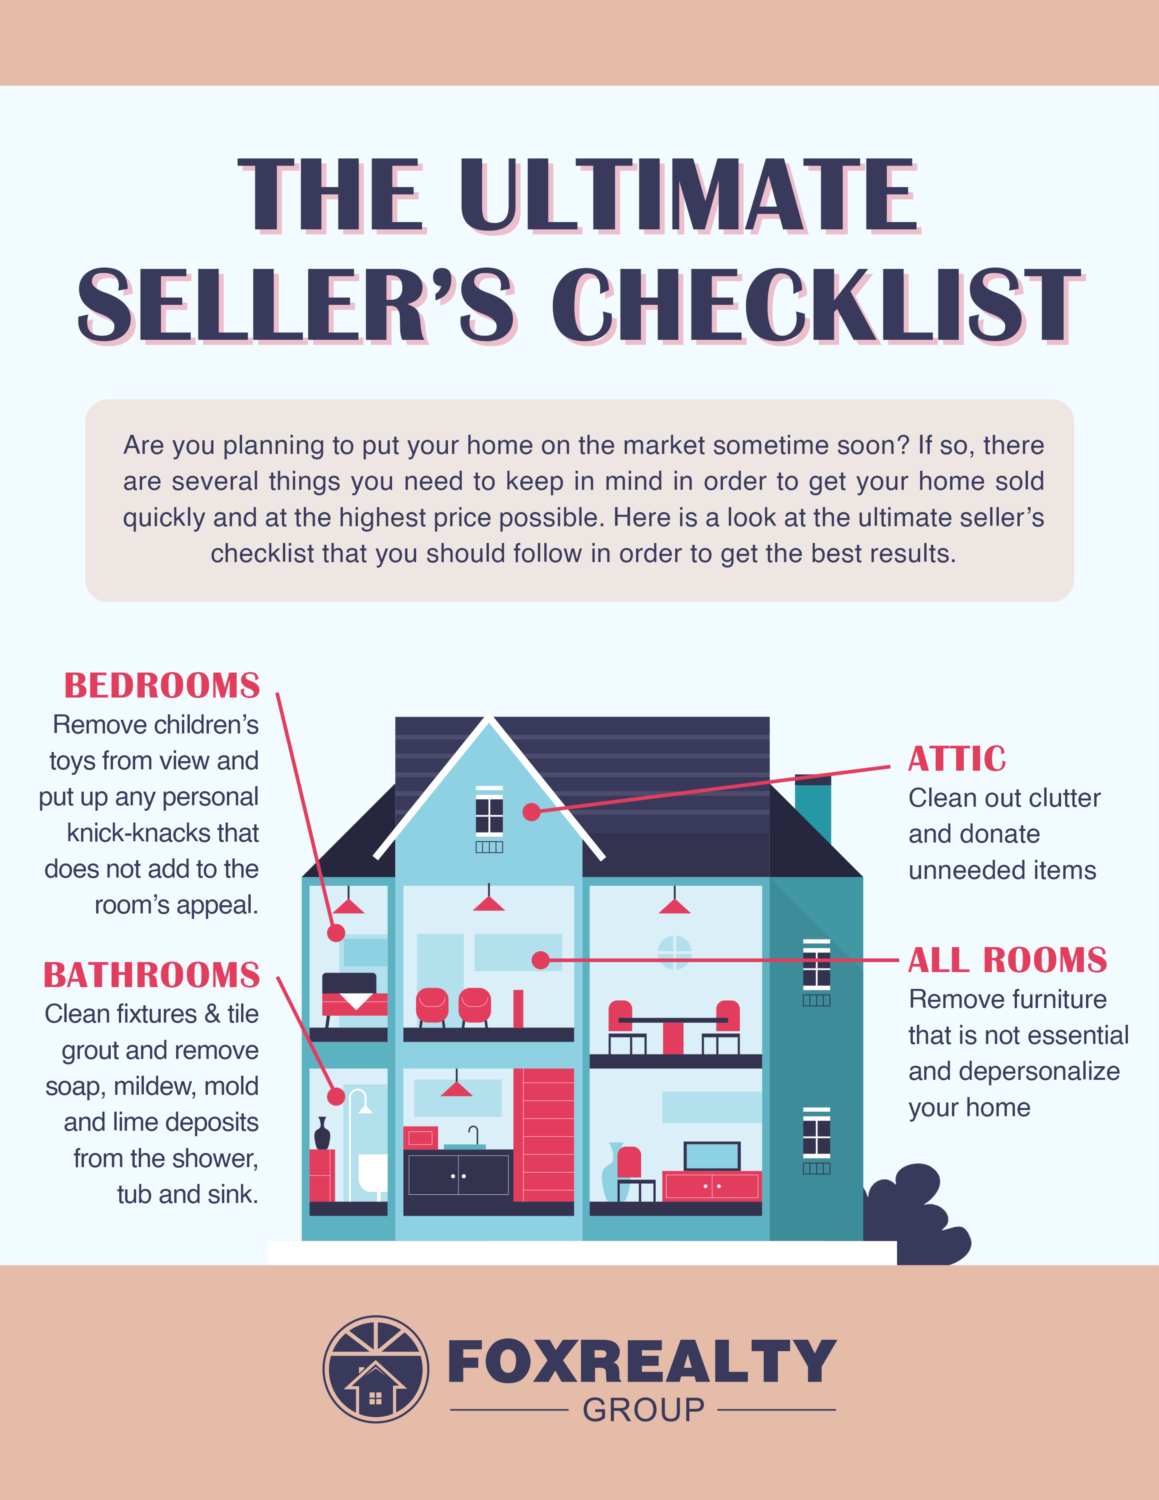 7 Things you Need to Know if You're Planning on Selling on